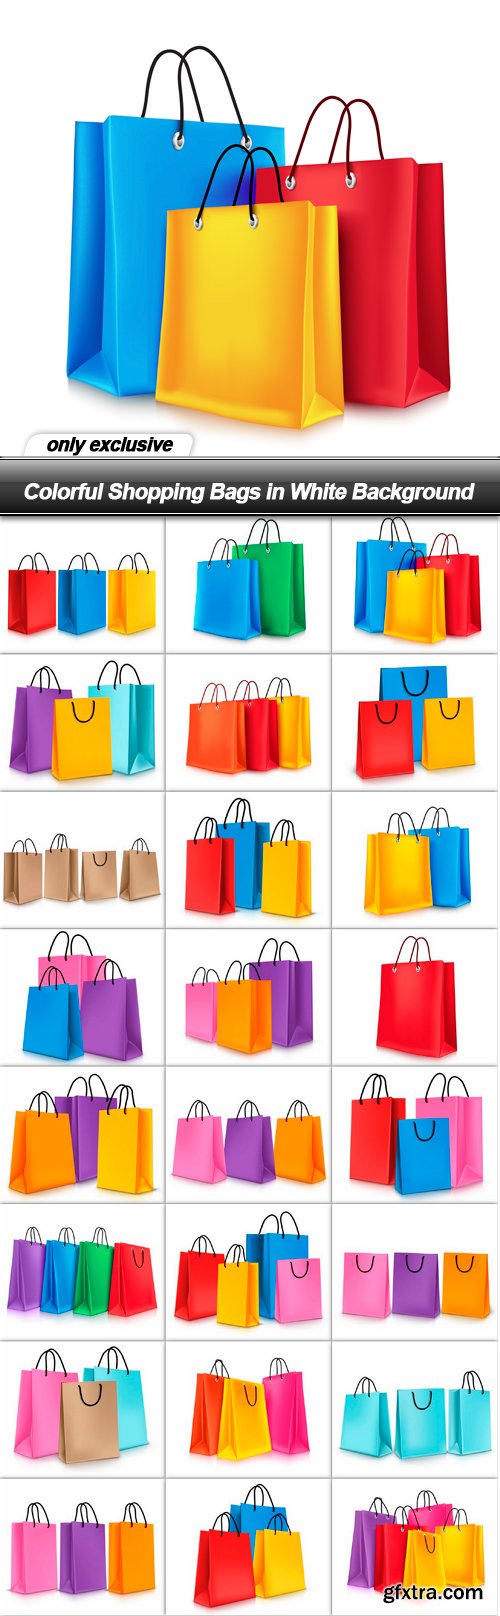 Colorful Shopping Bags in White Background - 24 EPS